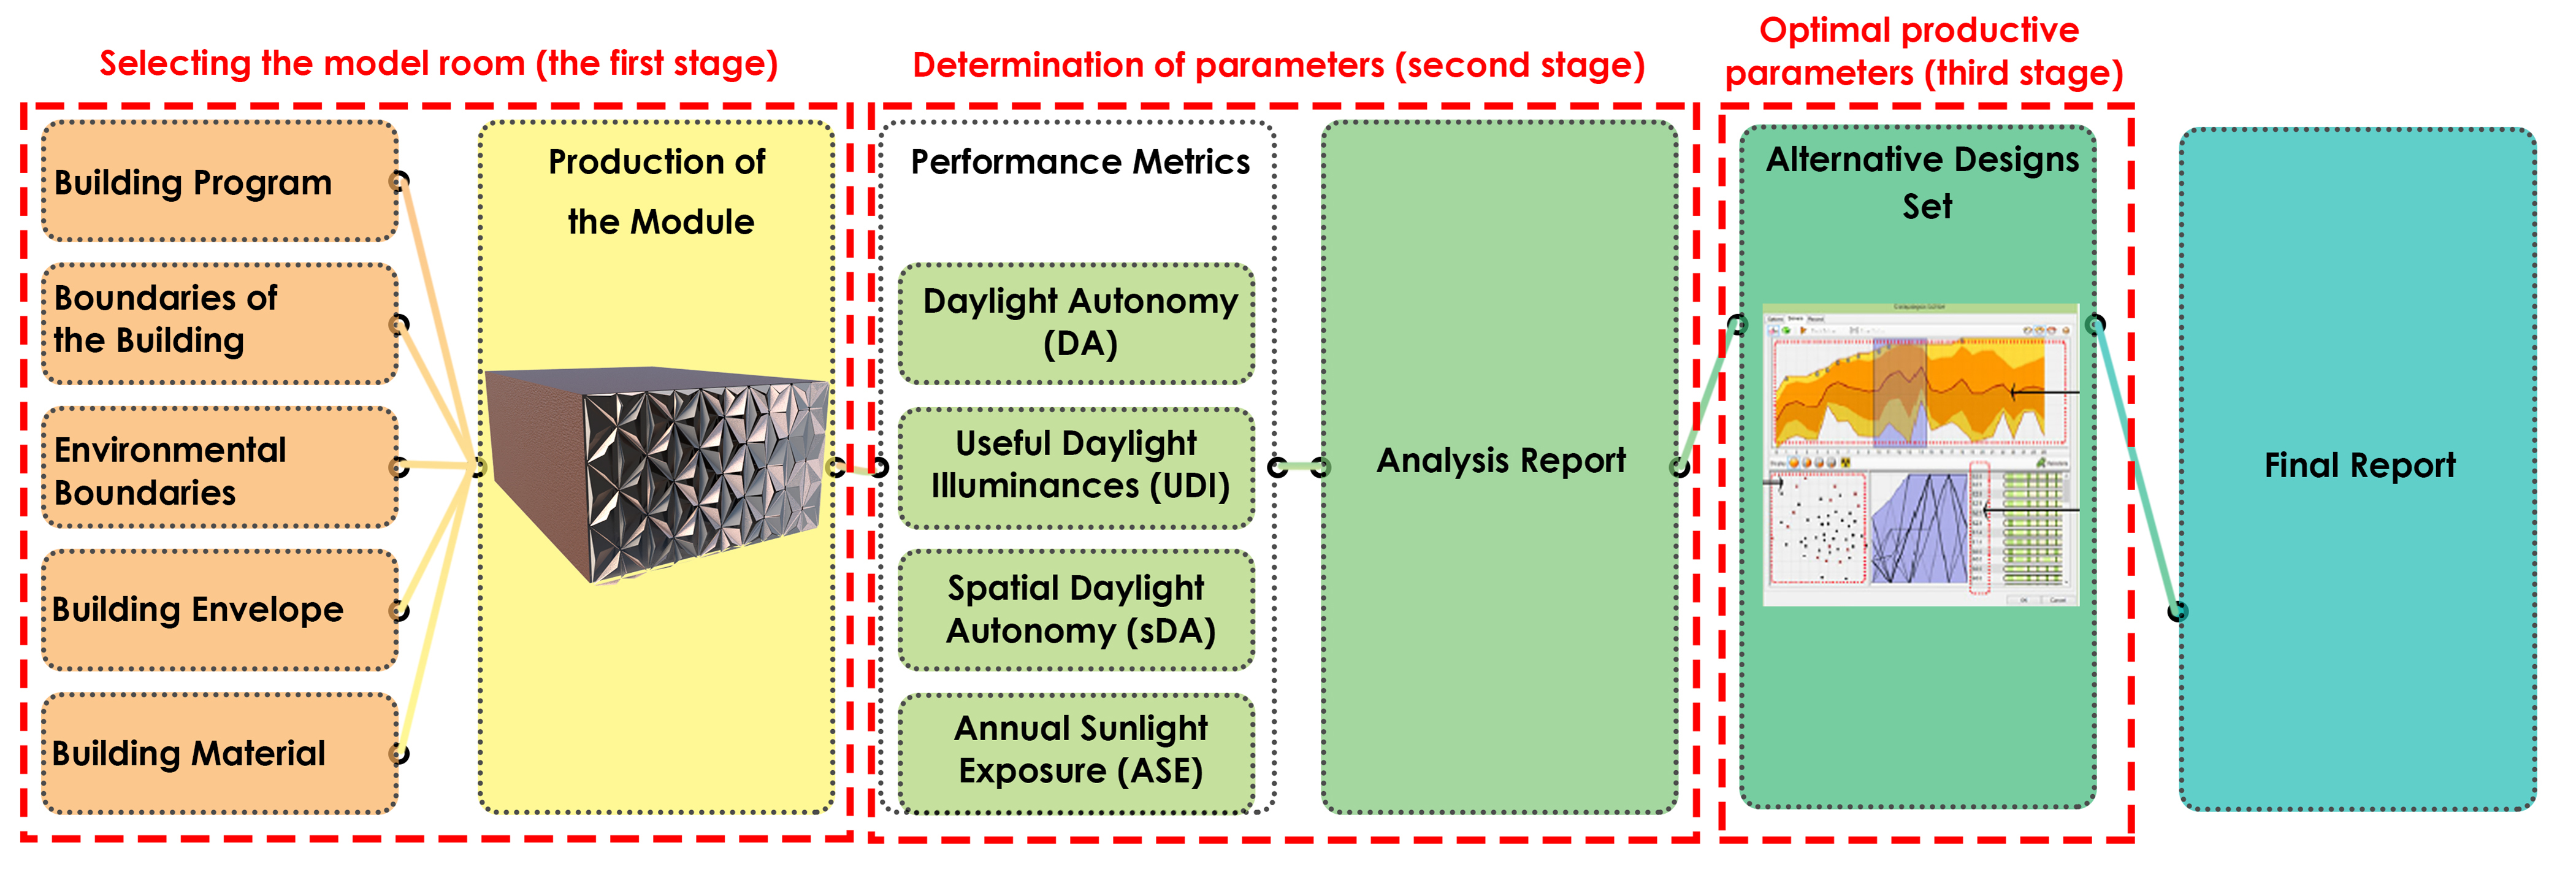 Implementation stages of the research process.